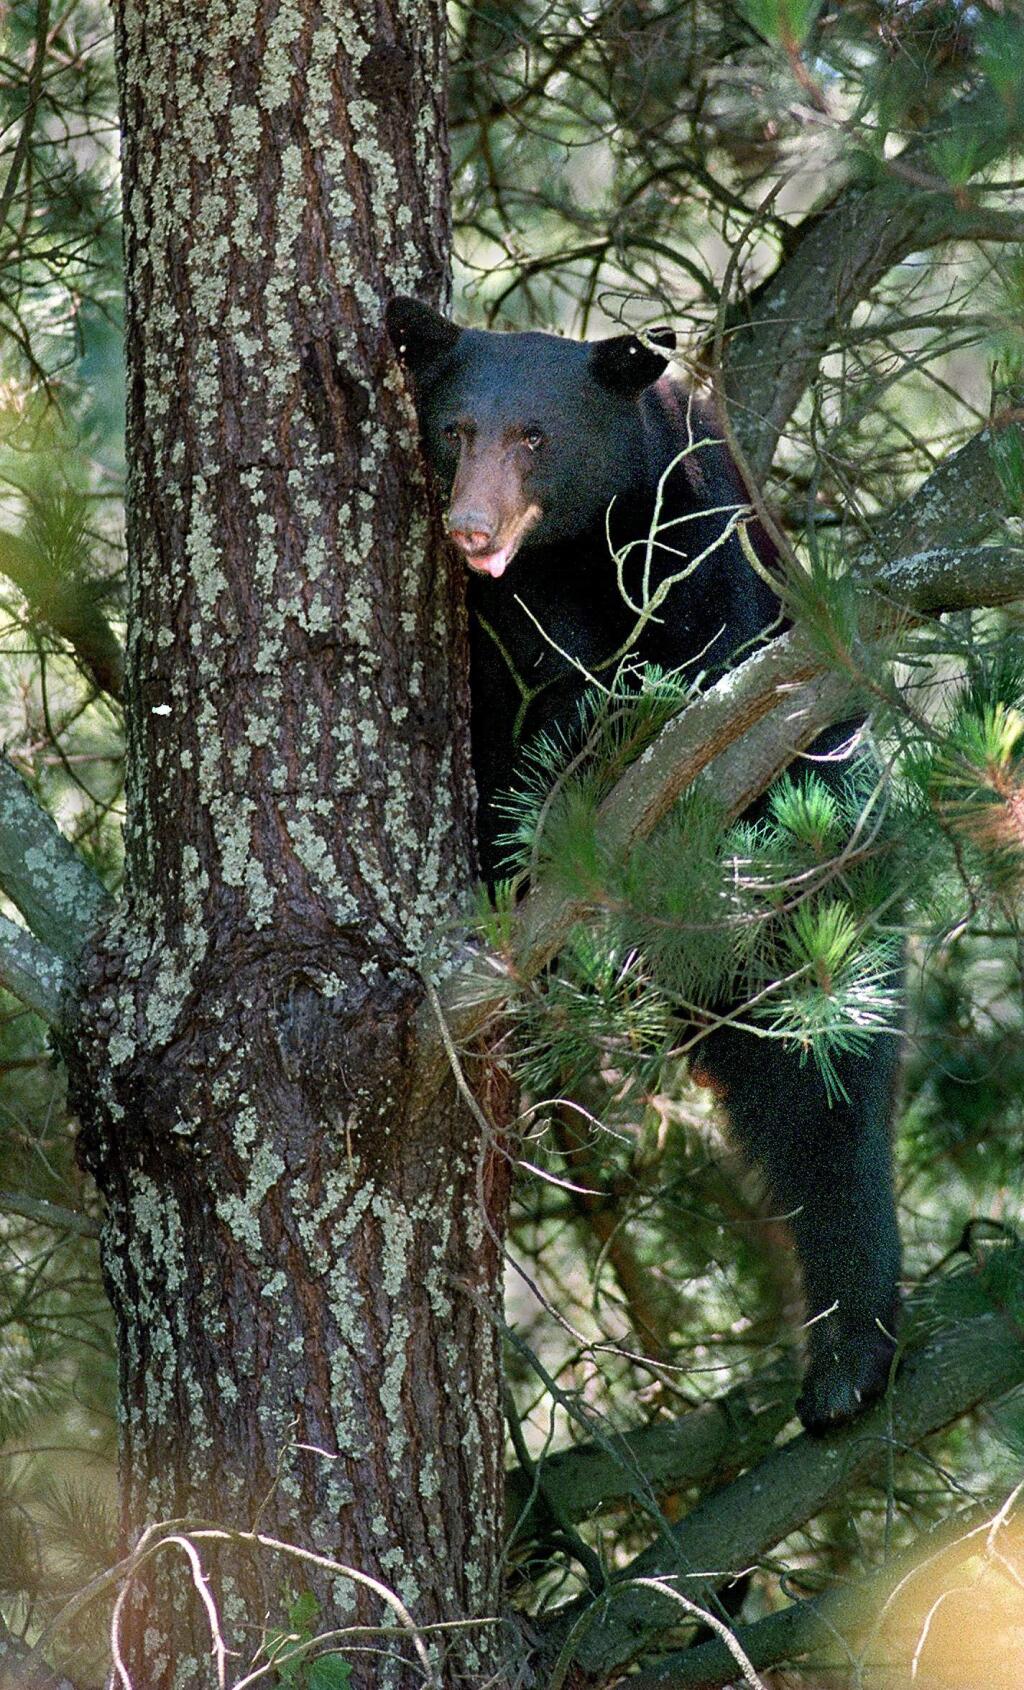 In 2013 this California black bear takes refuge in a tree behind the Gaige House in Glen Ellen, A biologist from the Department of Fish and Game tranquilized the 125 pound male bear, which had to be removed from the tree by a ladder truck.